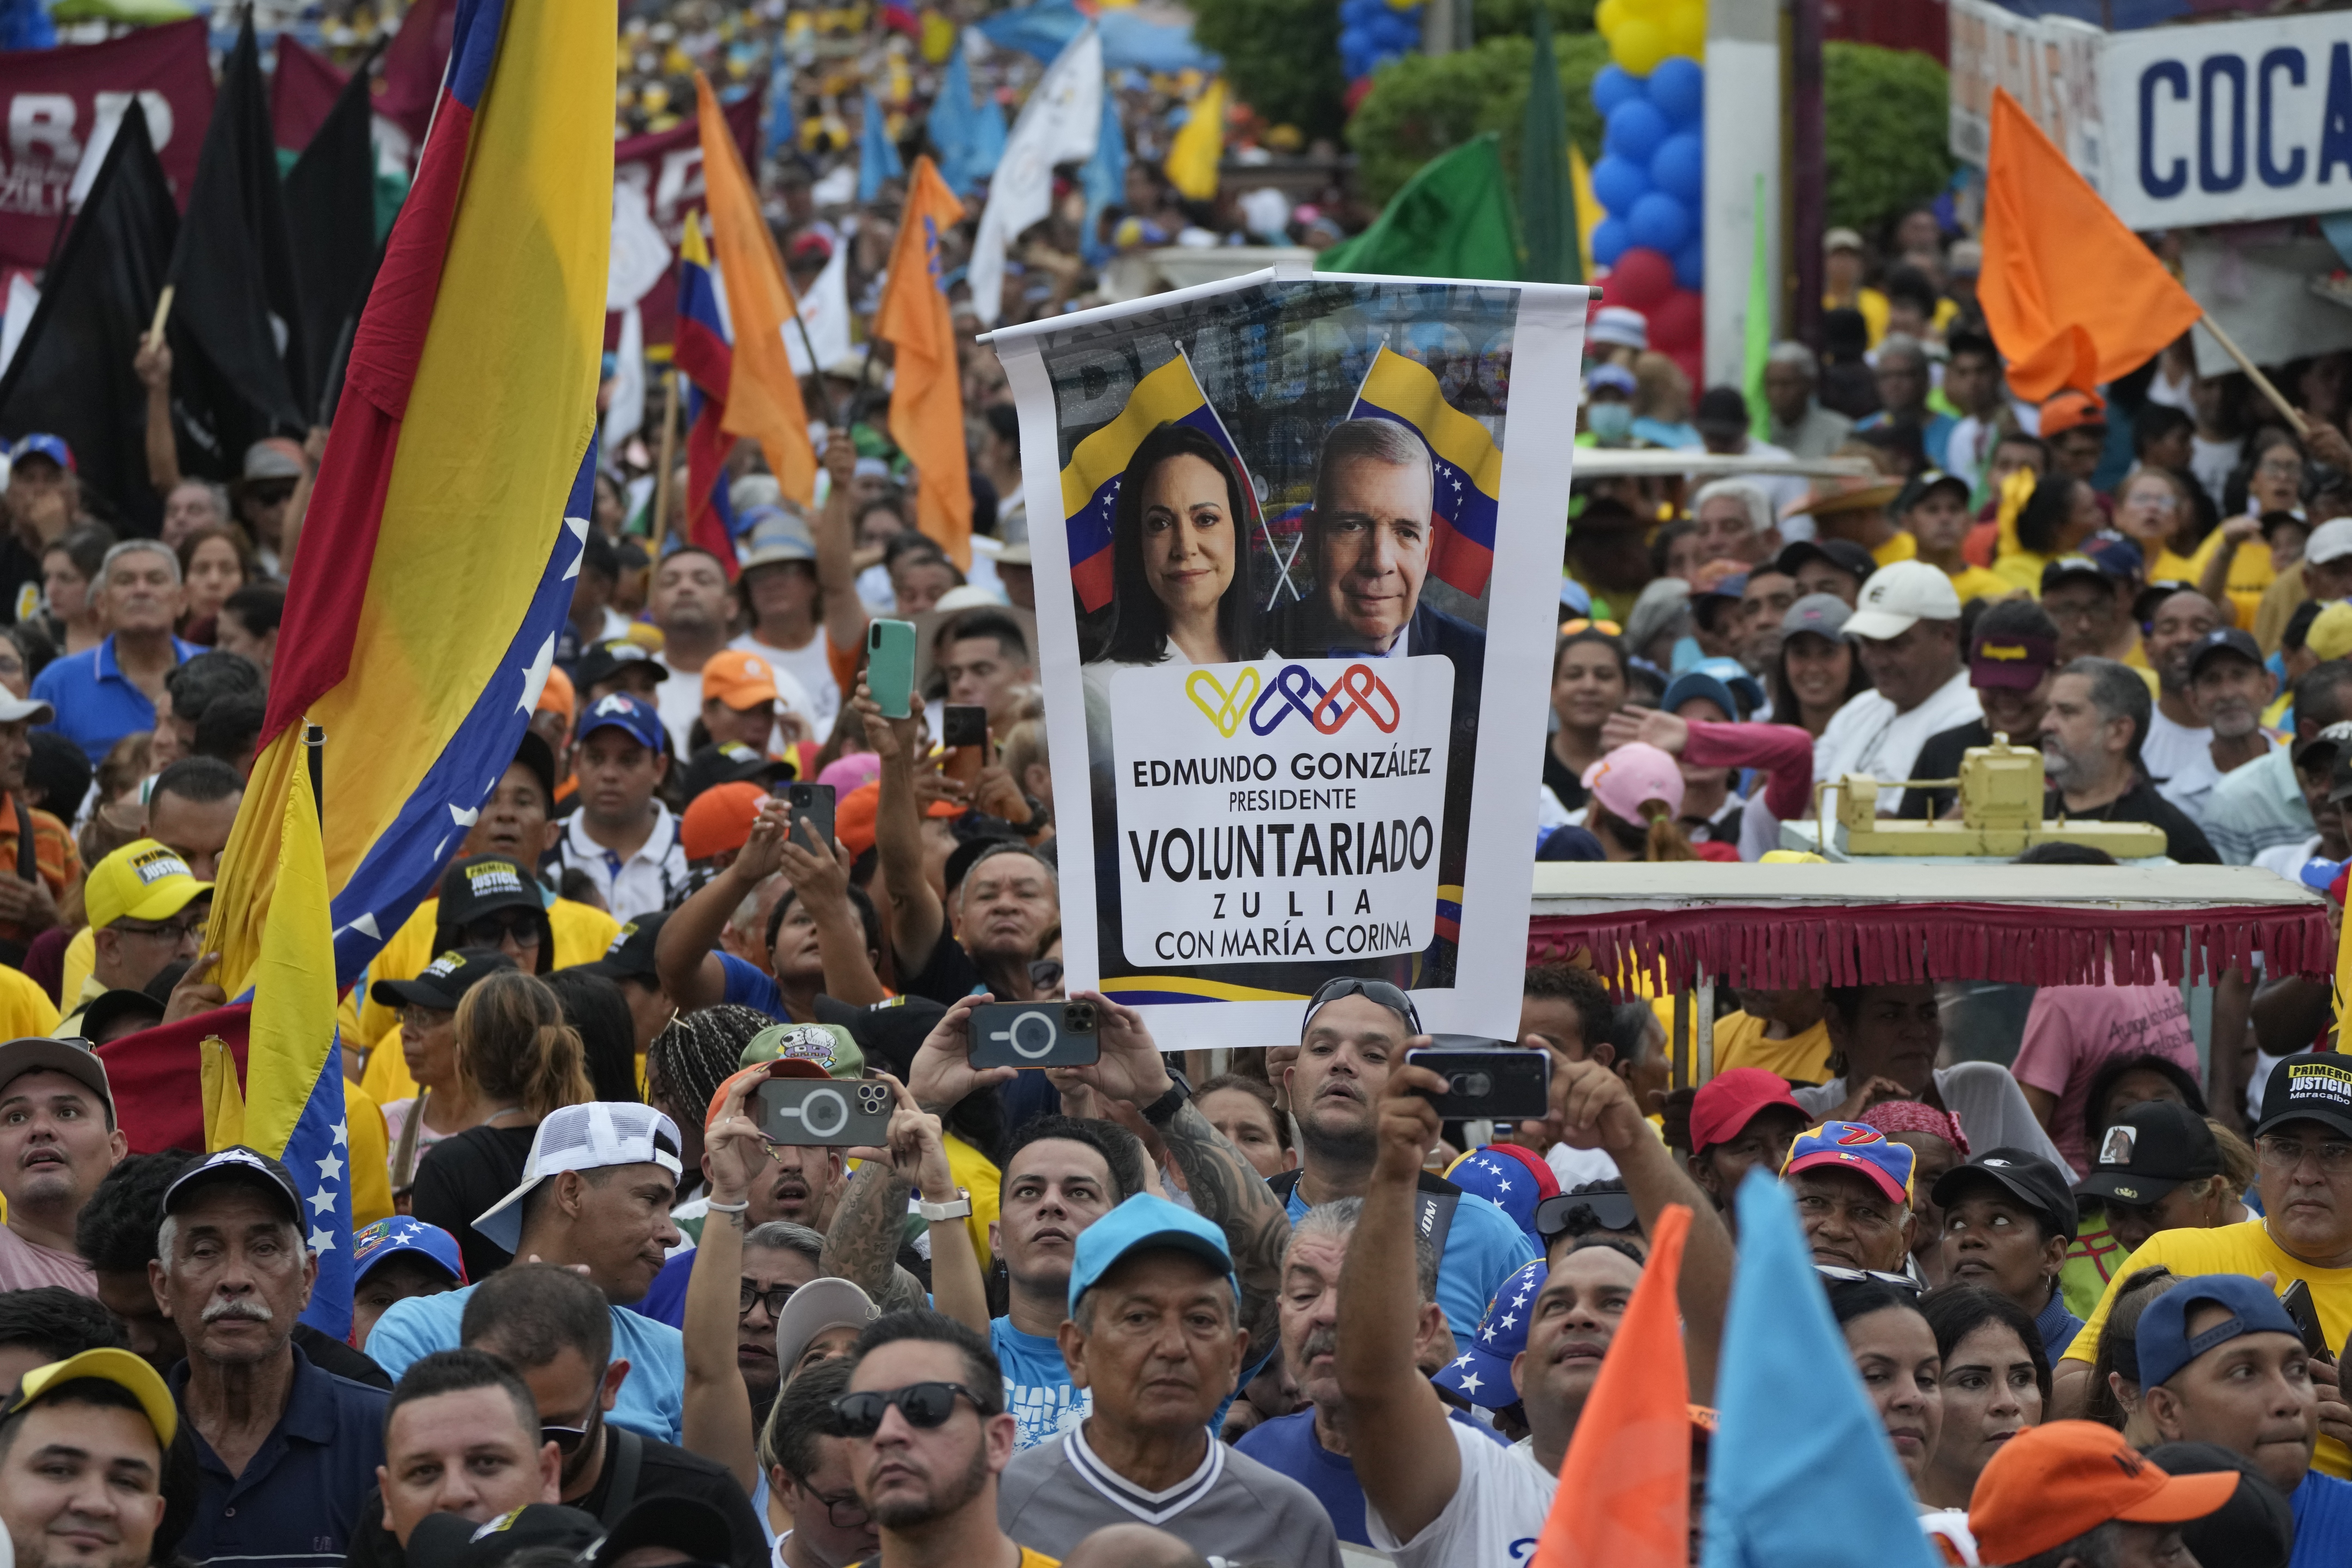 FILE - A supporter holds up a banner with images of opposition leader Maria Corina Machado and presidential candidate Edmundo Gonzalez, during a campaign rally in Maracaibo, Venezuela Thursday, May 2, 2024. No decision in Venezuela over the past 25 years has been as consequential as the choice voters will make on July 28. (AP Photo/Ariana Cubillos, File)